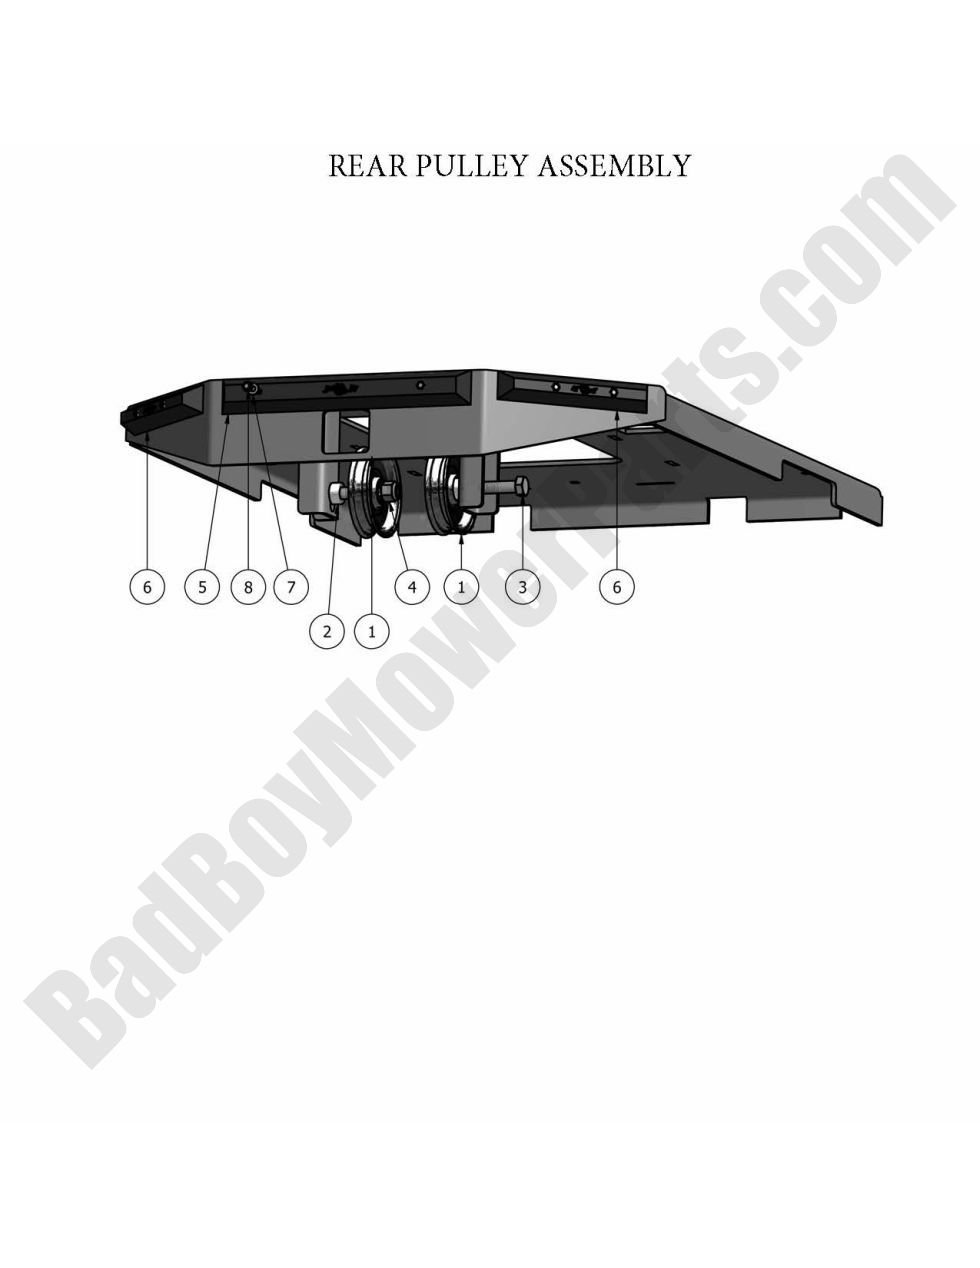 2010 AOS Rear Pulley Assembly